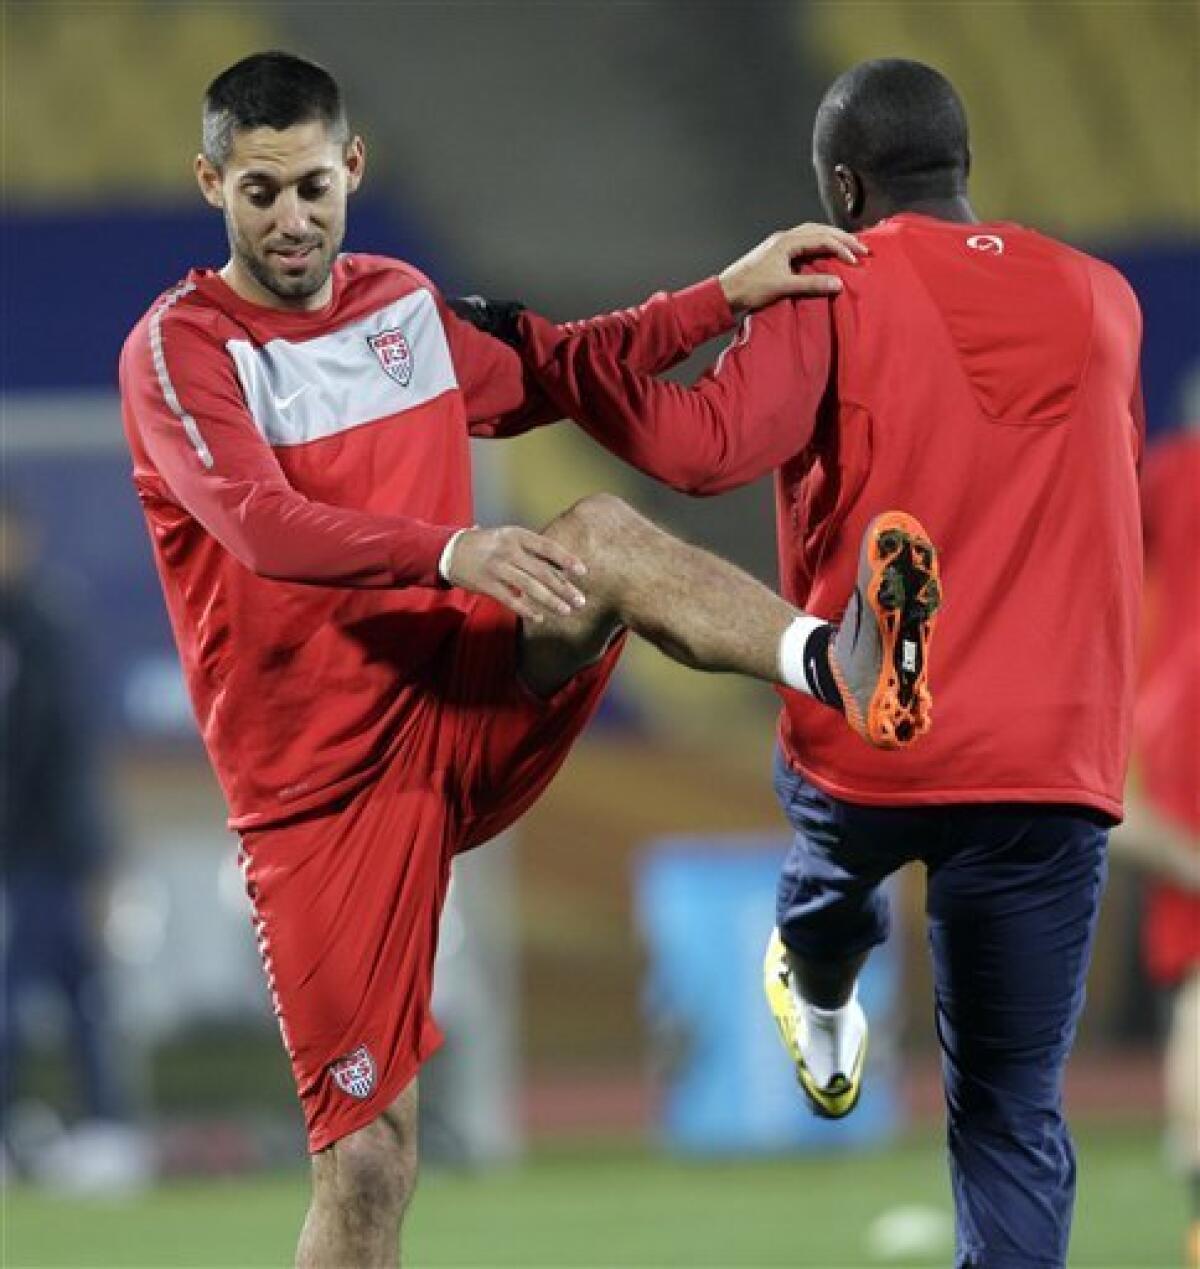 U.S. national soccer players Clint Dempsey, left, and Jozy Altidore, stretch during training at Royal Bafokeng Stadium in Rustenburg, South Africa Friday, June 11, 2010. The U.S. will play England in a soccer World Cup Group C match on Saturday. (AP Photo/Elise Amendola)